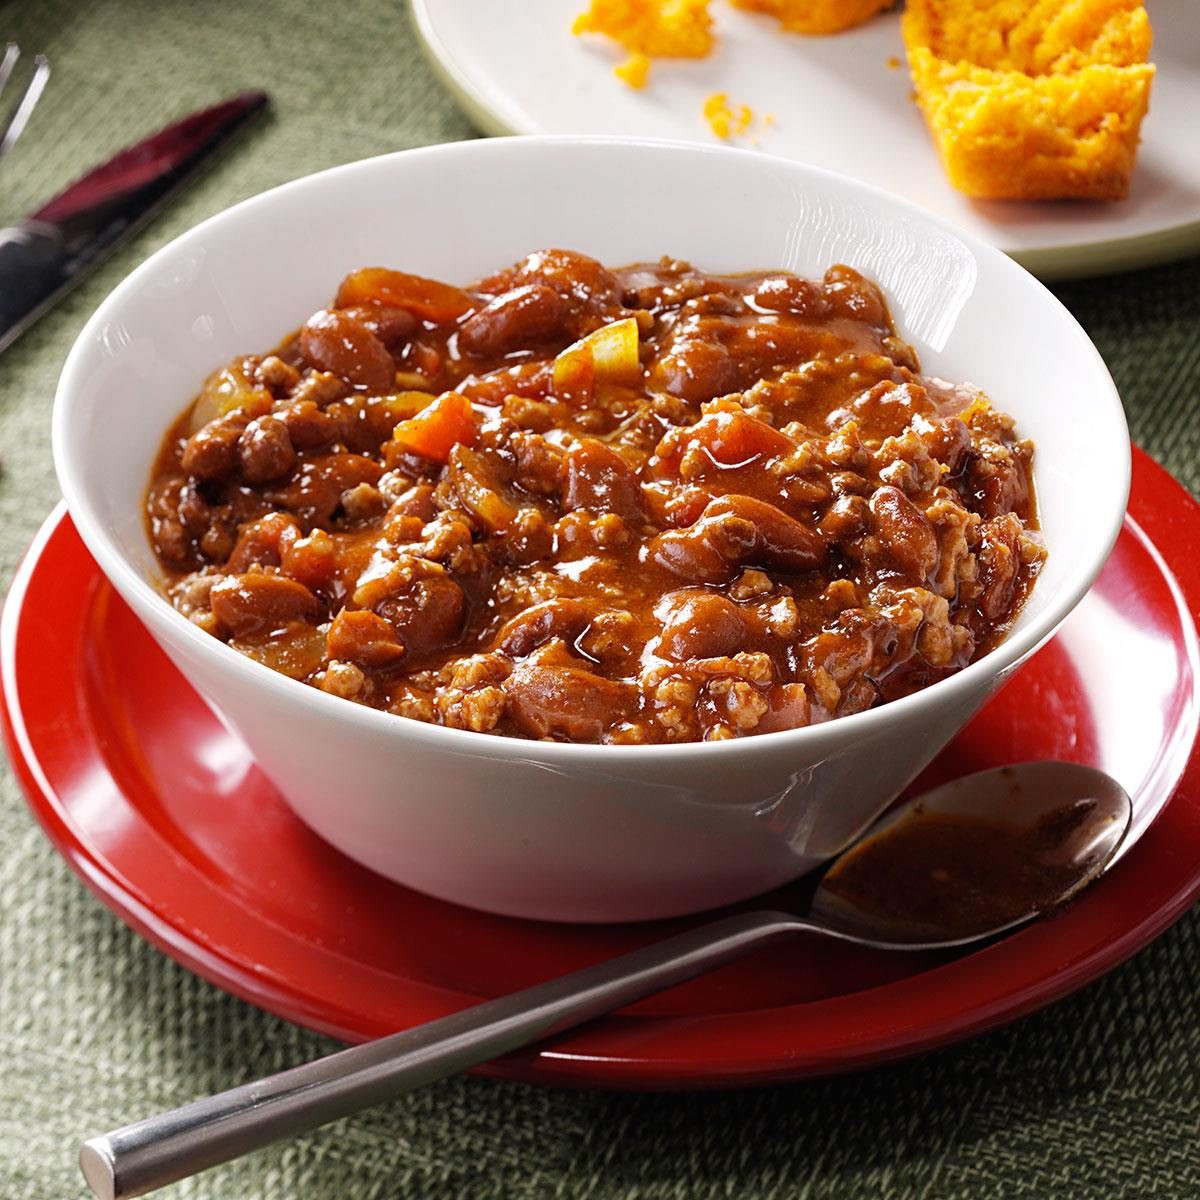 Chili Recipes With Beef
 Hearty Beef & Bean Chili Recipe